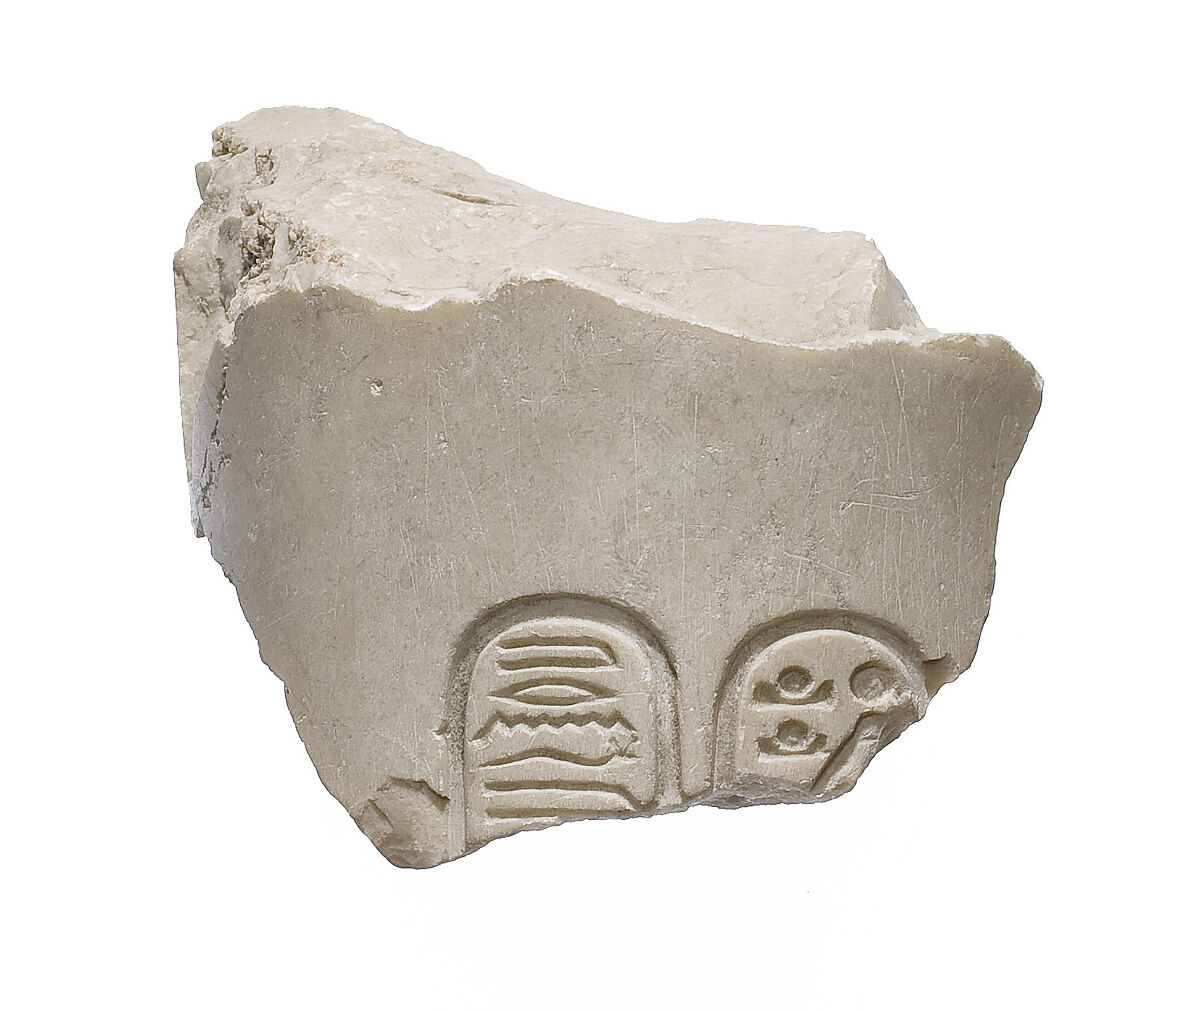 Arm, outside shoulder, Aten cartouches, Indurated limestone 